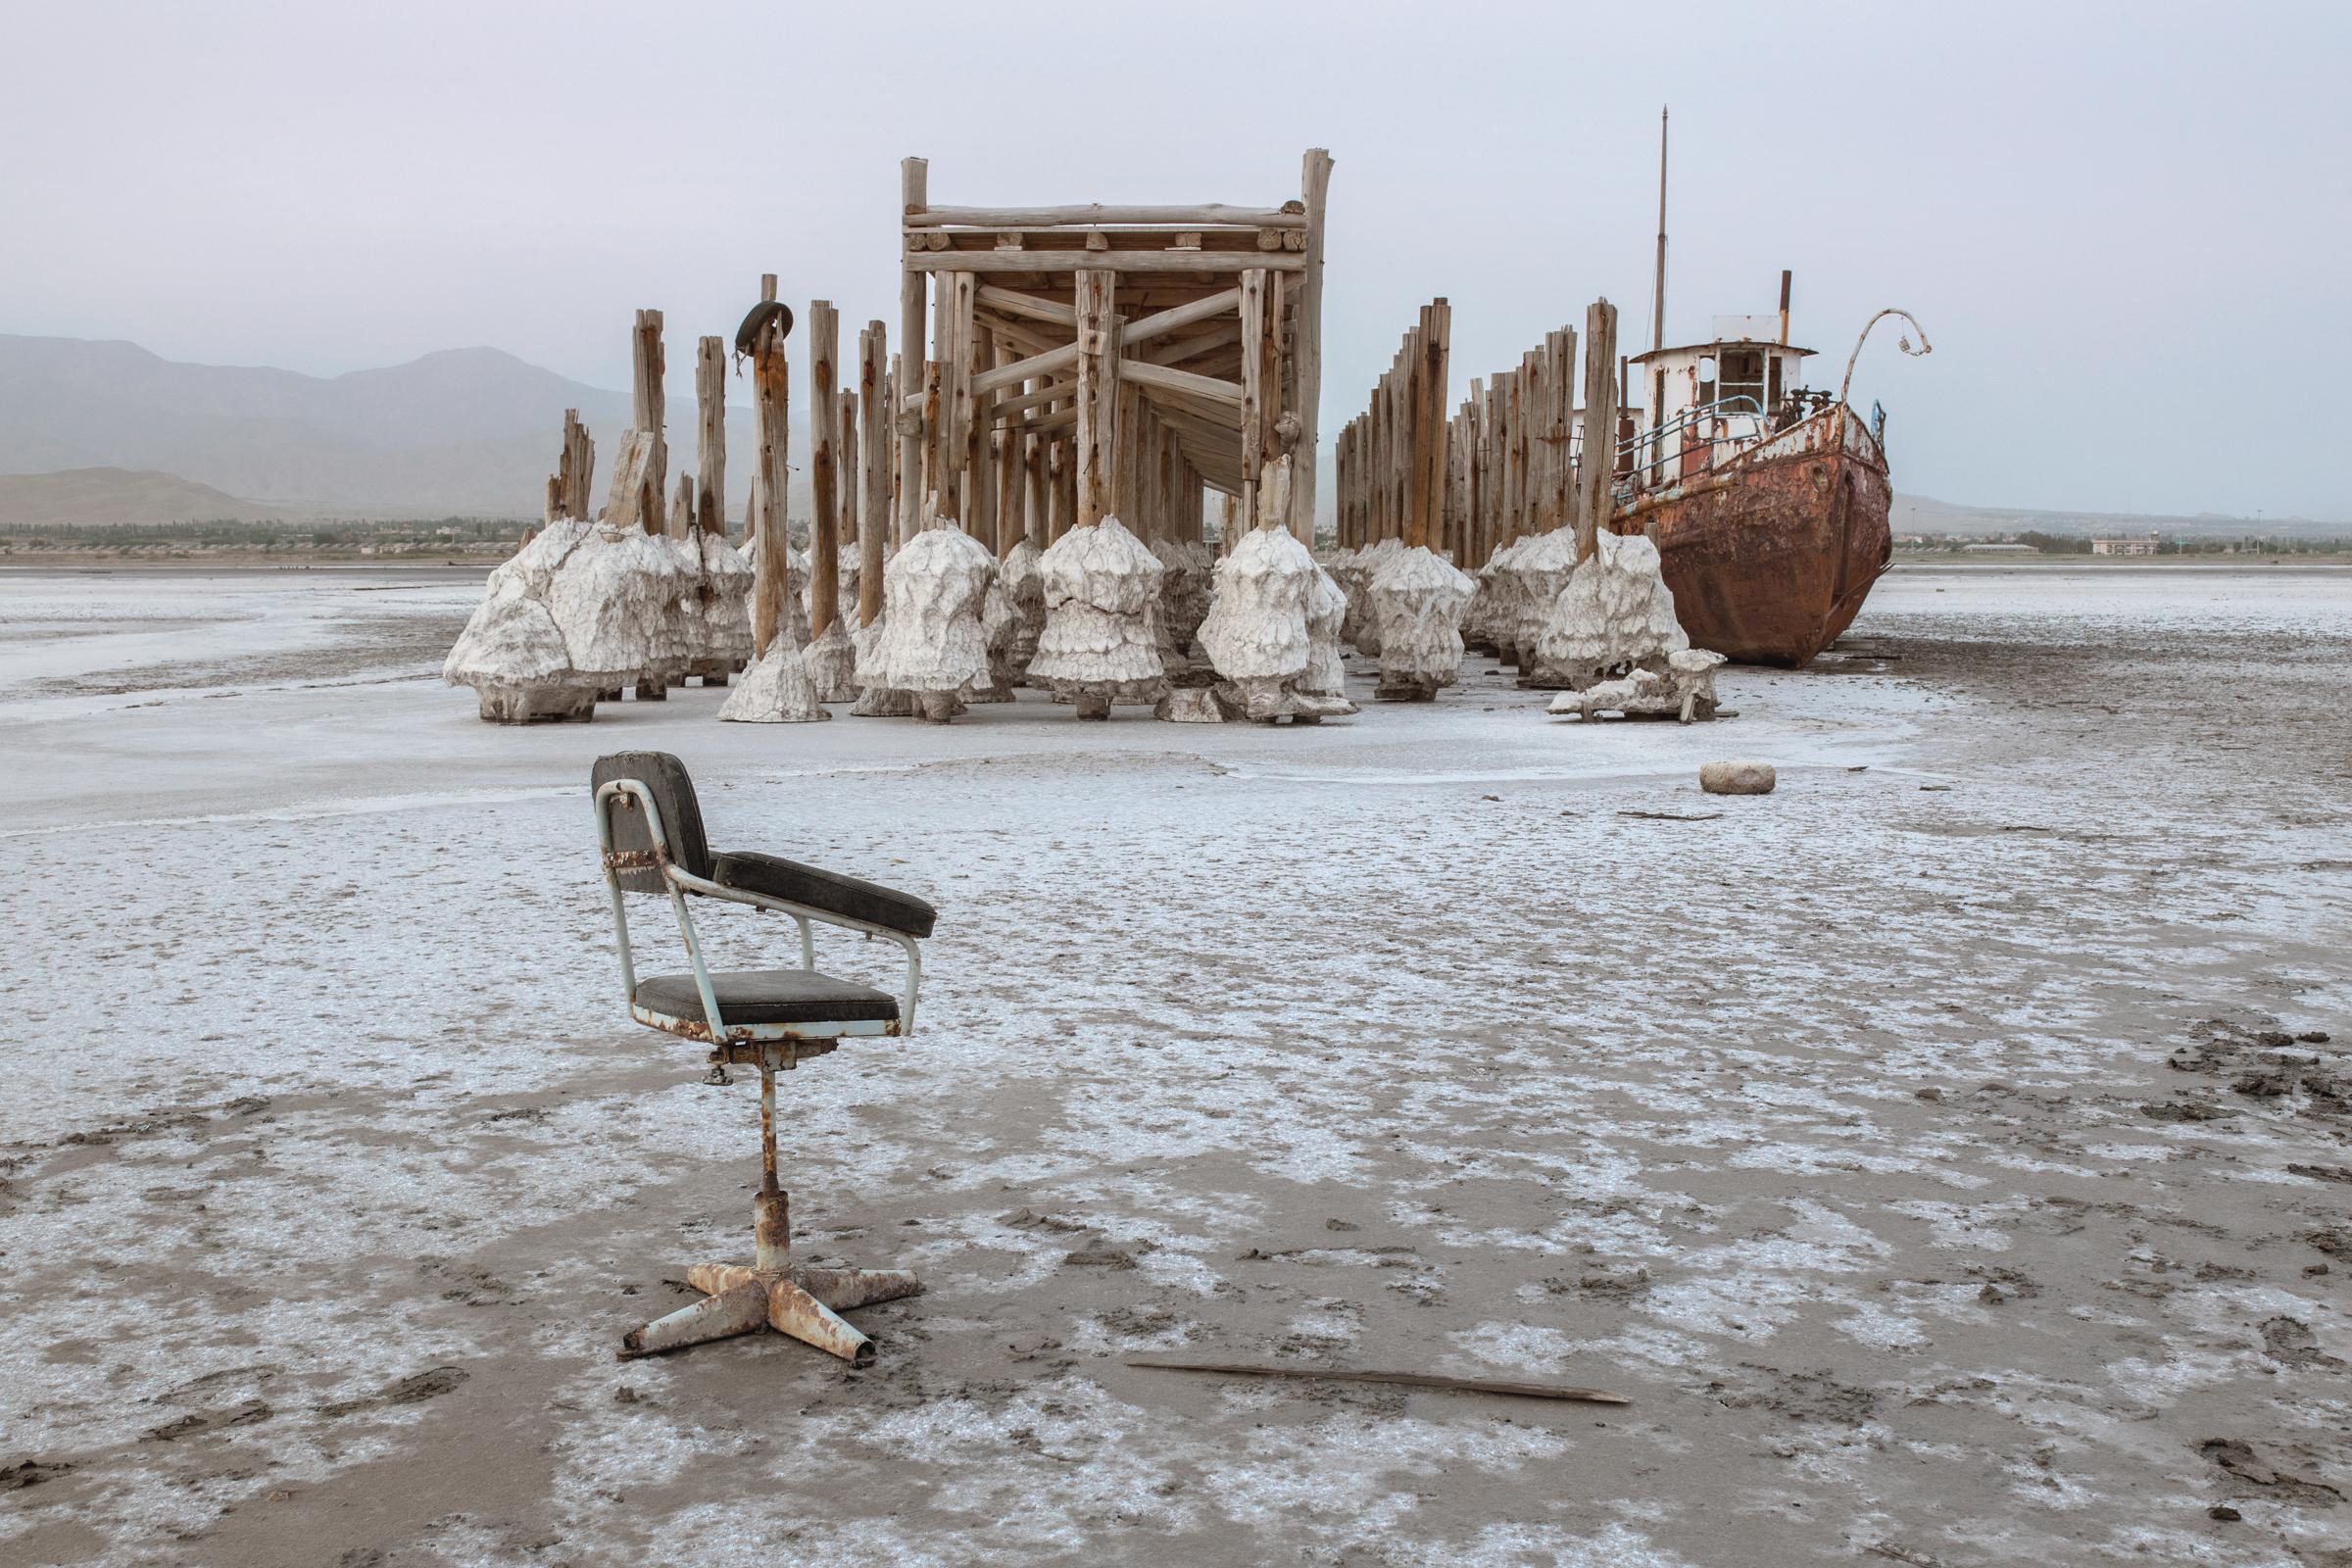  On the shore of Sharafkhaneh port in 2015, an abandoned ship sits wedged against a pier that leads nowhere. Sharafkhaneh port was once one of the most important ports on Lake Urmia. Ships used these piers to move people and equipment between cities around the lake. It has shut down, and few remaining ships have gone aground. 